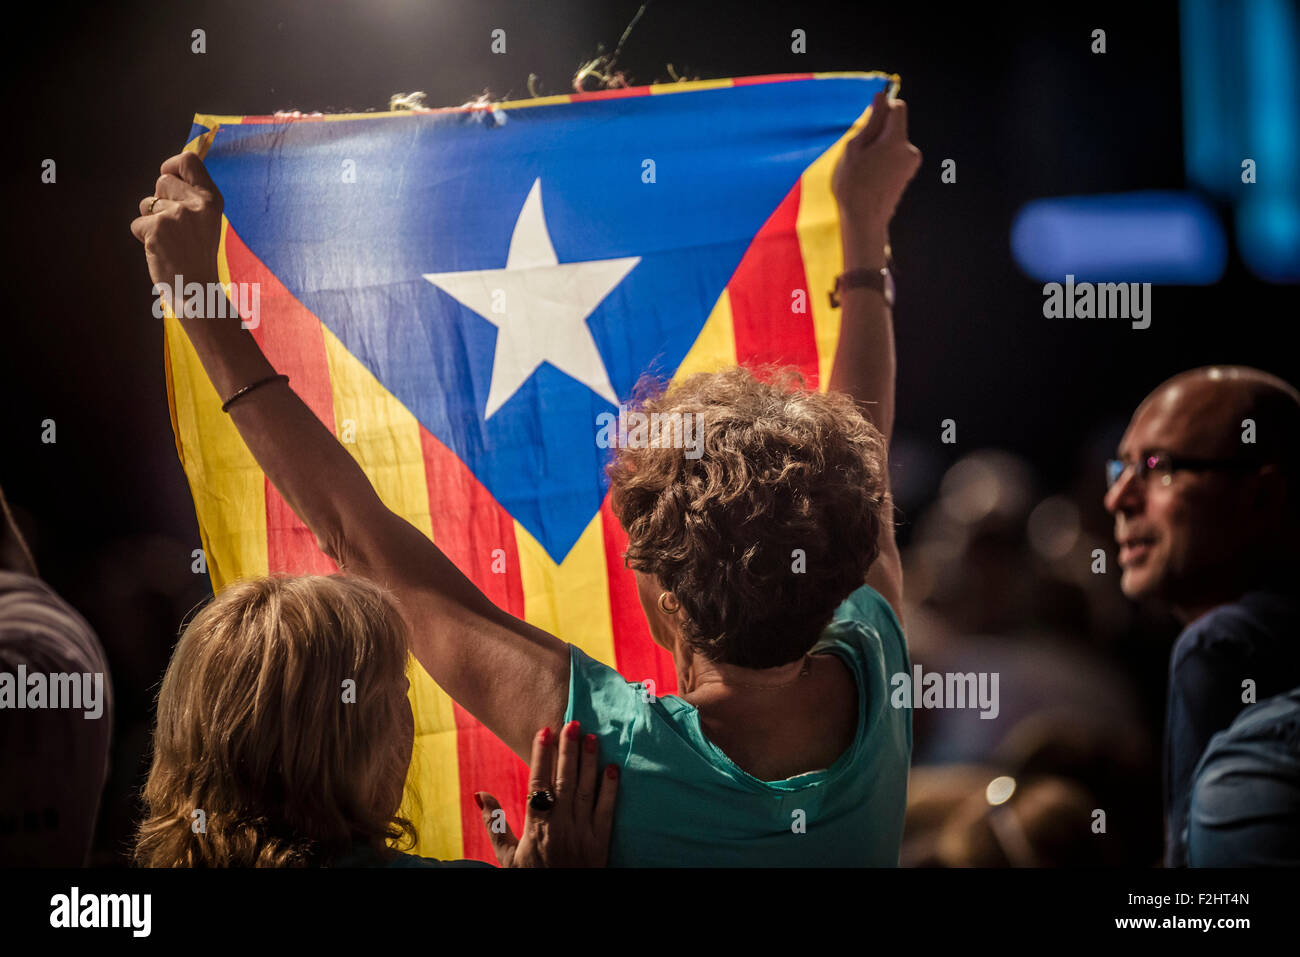 L'Hospitalet, Spain. September 19th, 2015: A supporter holds an 'estelada flag' during the central campaign act of the pro-independence cross-party electoral list 'Junts pel Si' (Together for the yes) in L'Hospitalet de Llobregat Credit:  matthi/Alamy Live News Stock Photo